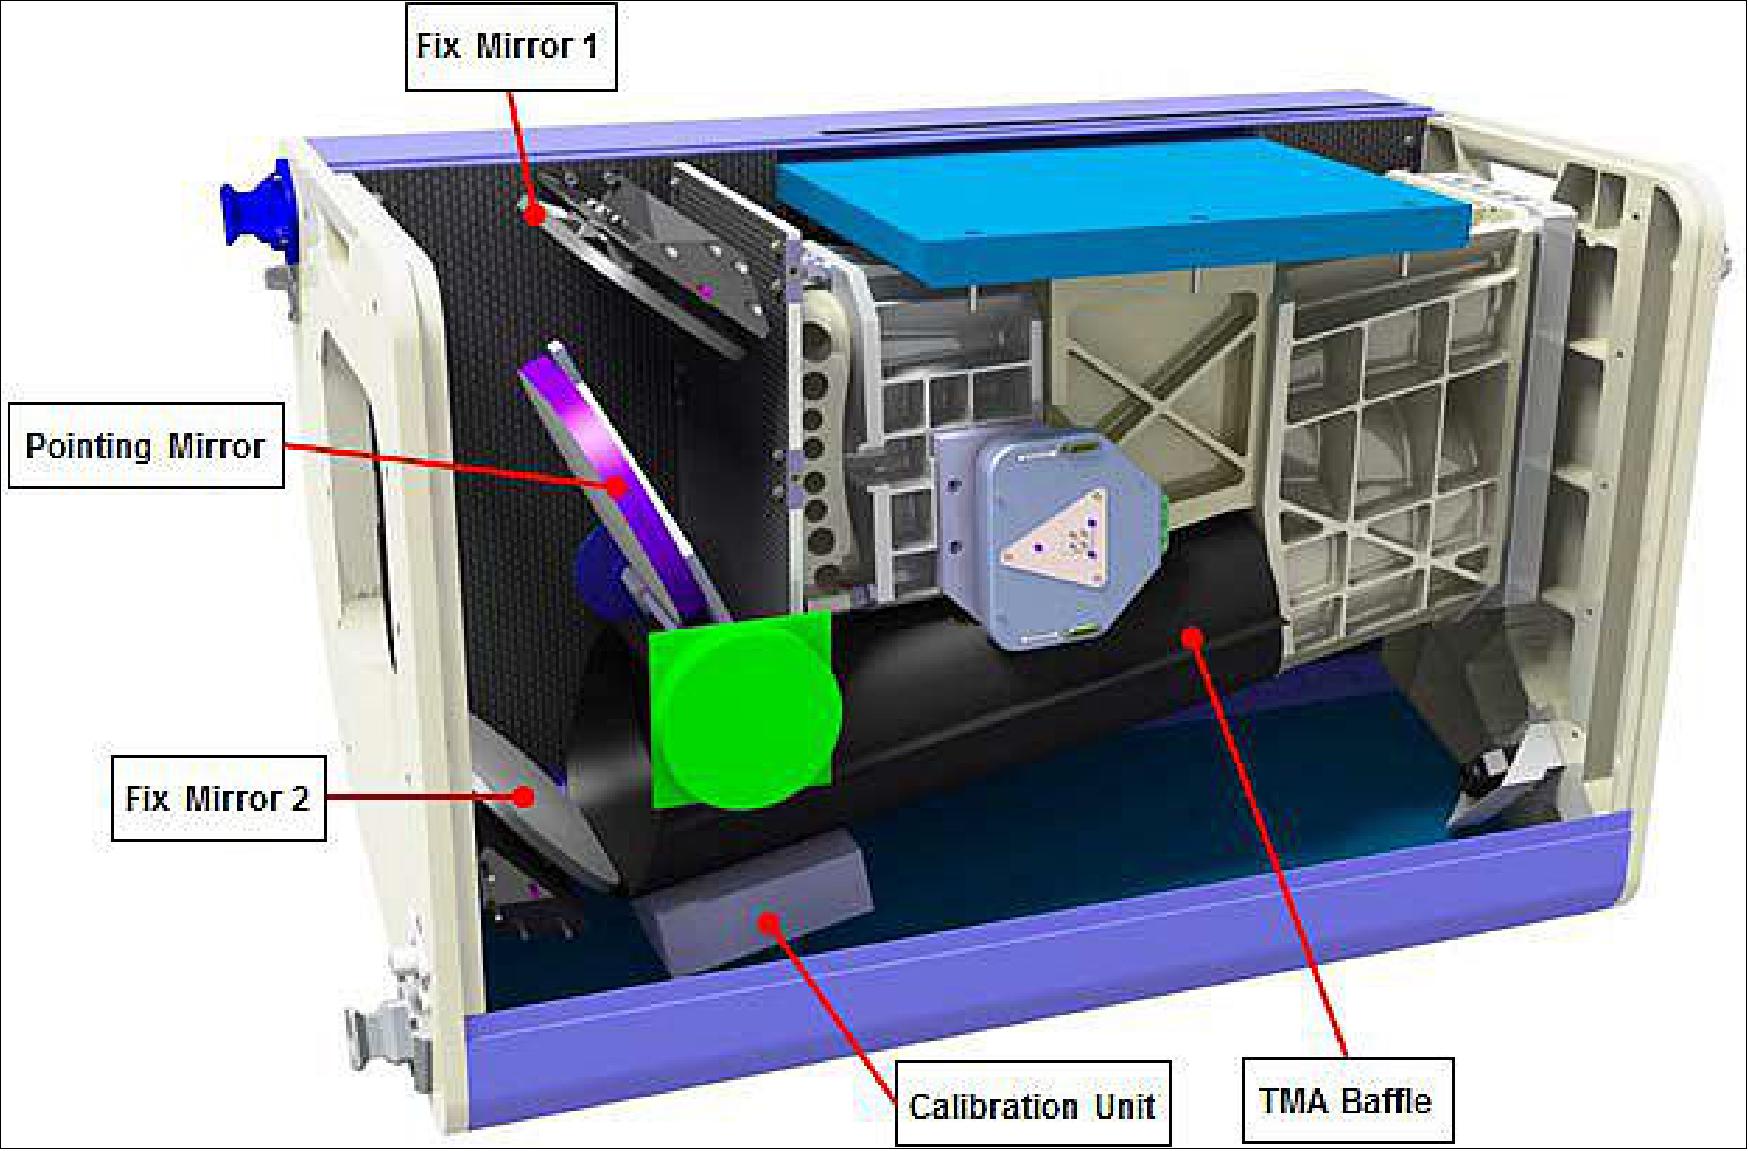 Figure 6: Illustration of the main components of the DESIS instrument (image credit: DLR, Ref. 11)